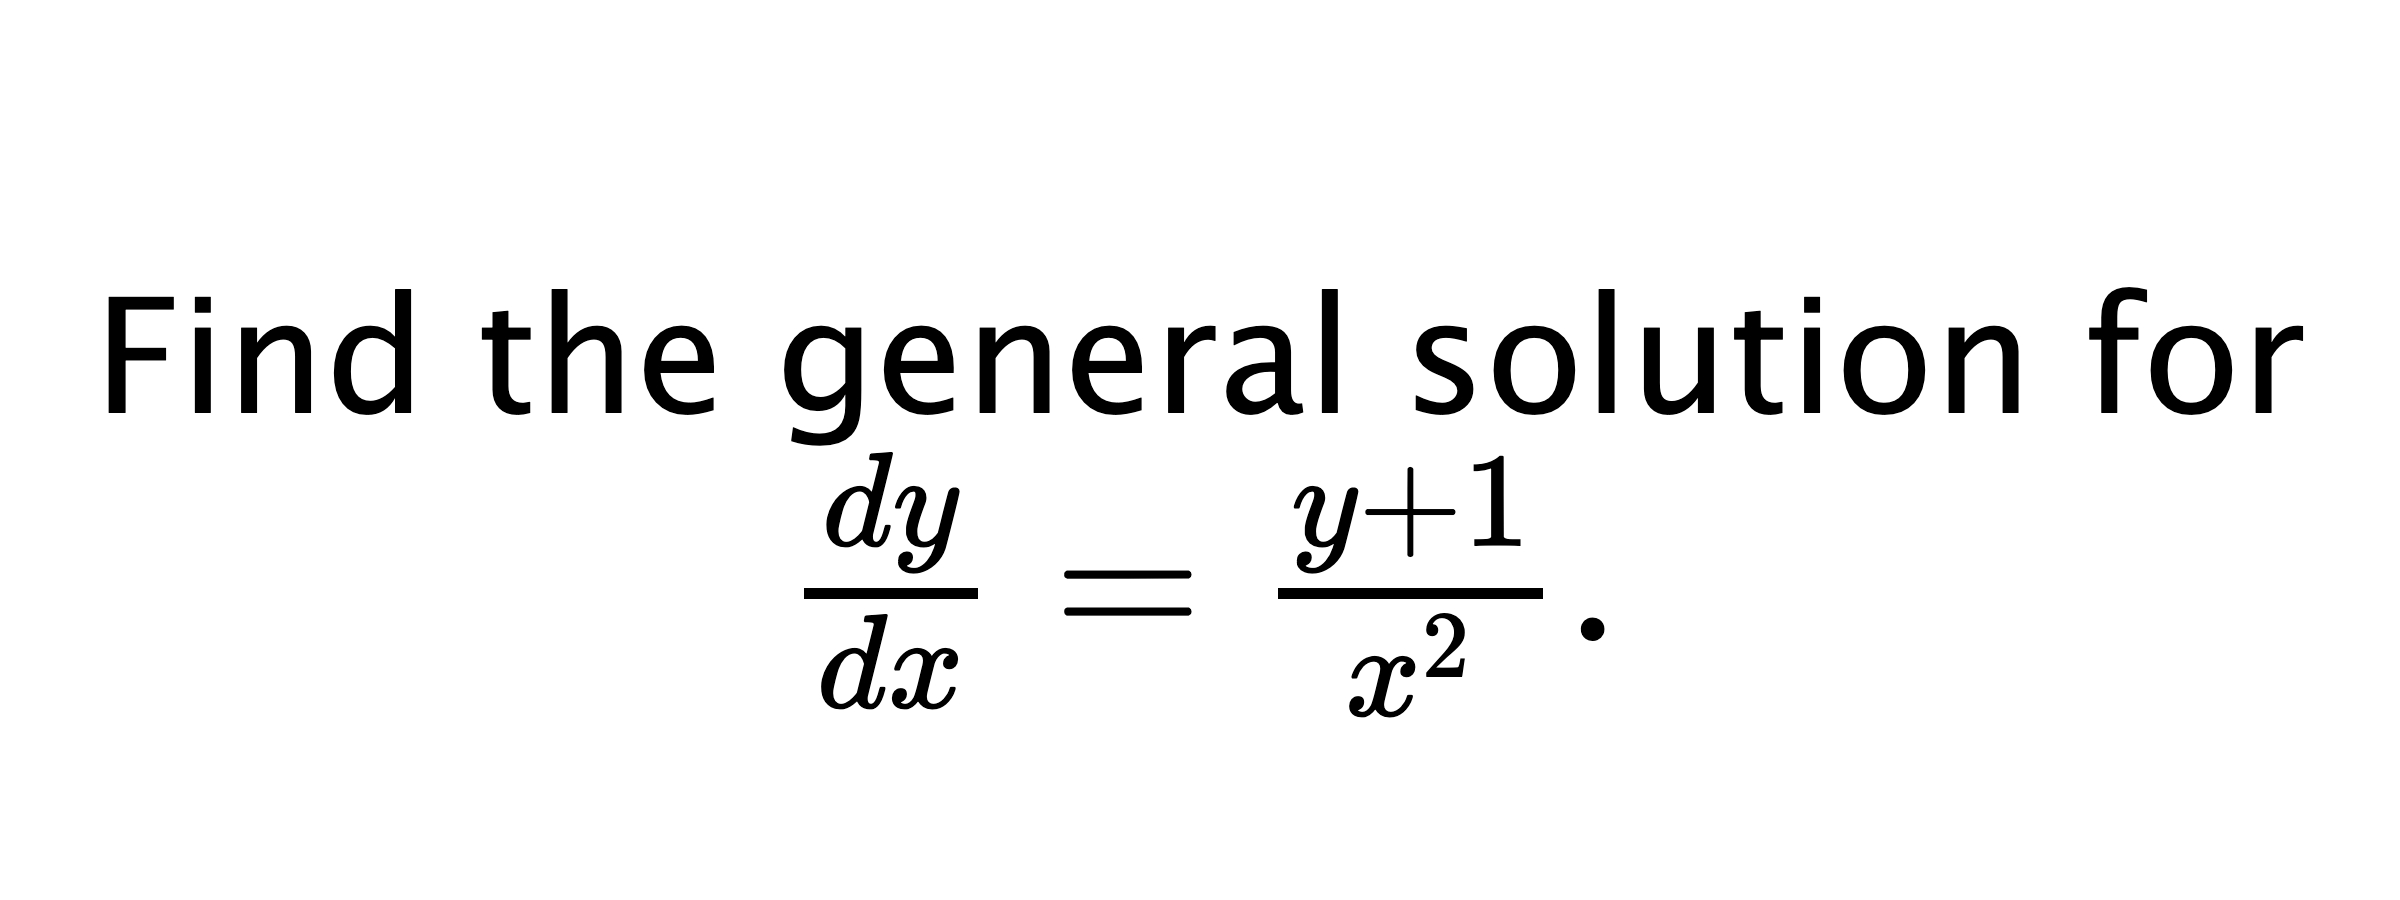  Find the general solution for $ \frac{dy}{dx}=\frac{y+1}{x^{2}}. $